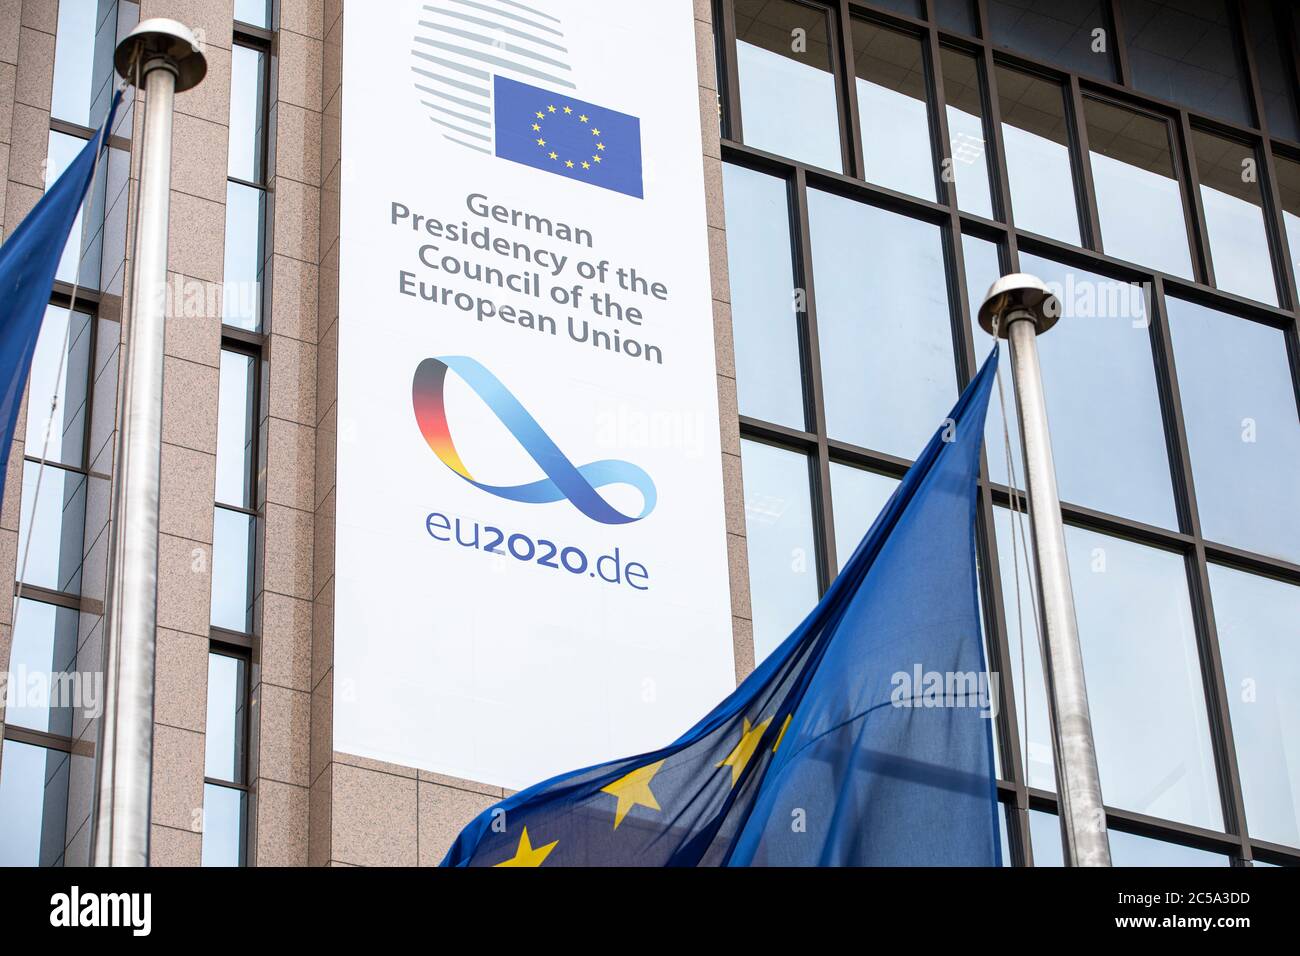 BRUSSELS, Belgium - july 1st, 2020: new banner of german rotating presidency in front of the seat of the Council of the European Union, Stock Photo